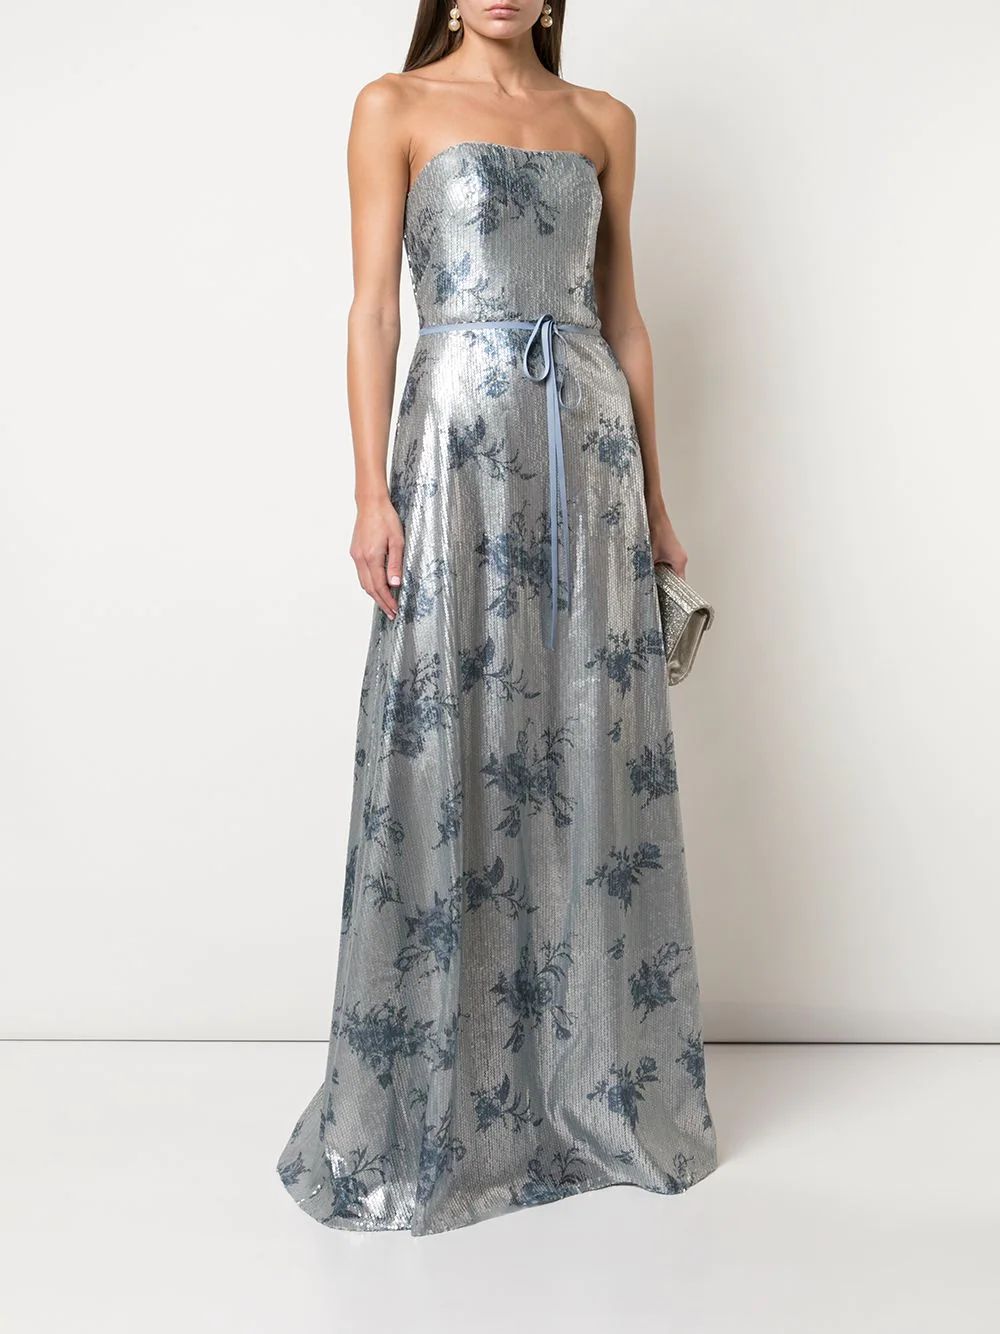 sequin embellished bridesmaid gown | Farfetch Global